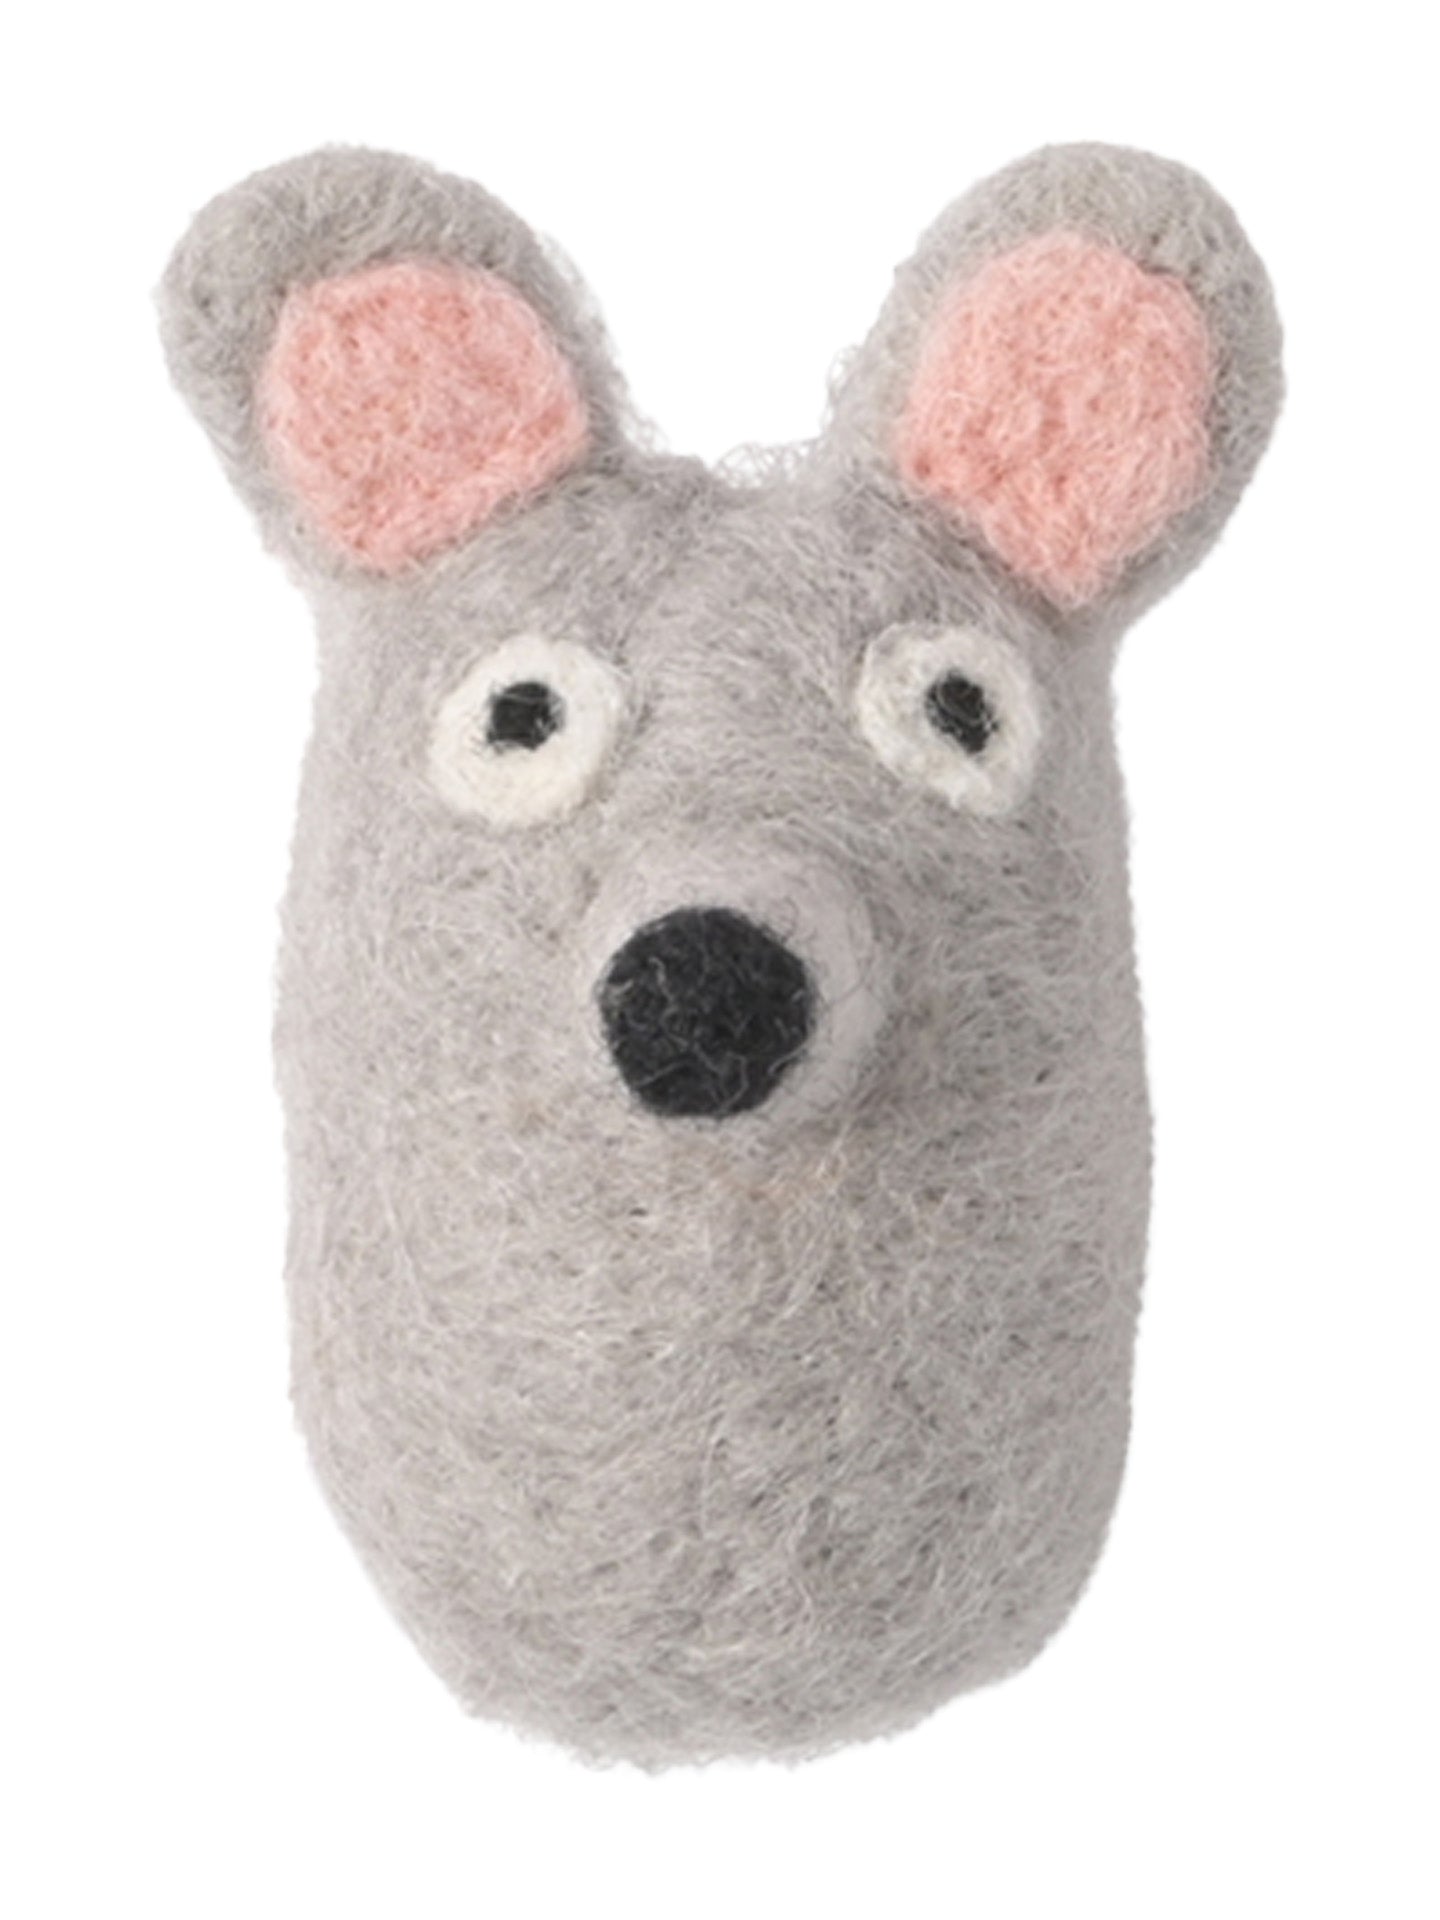 Woollen mouse hanging ornament